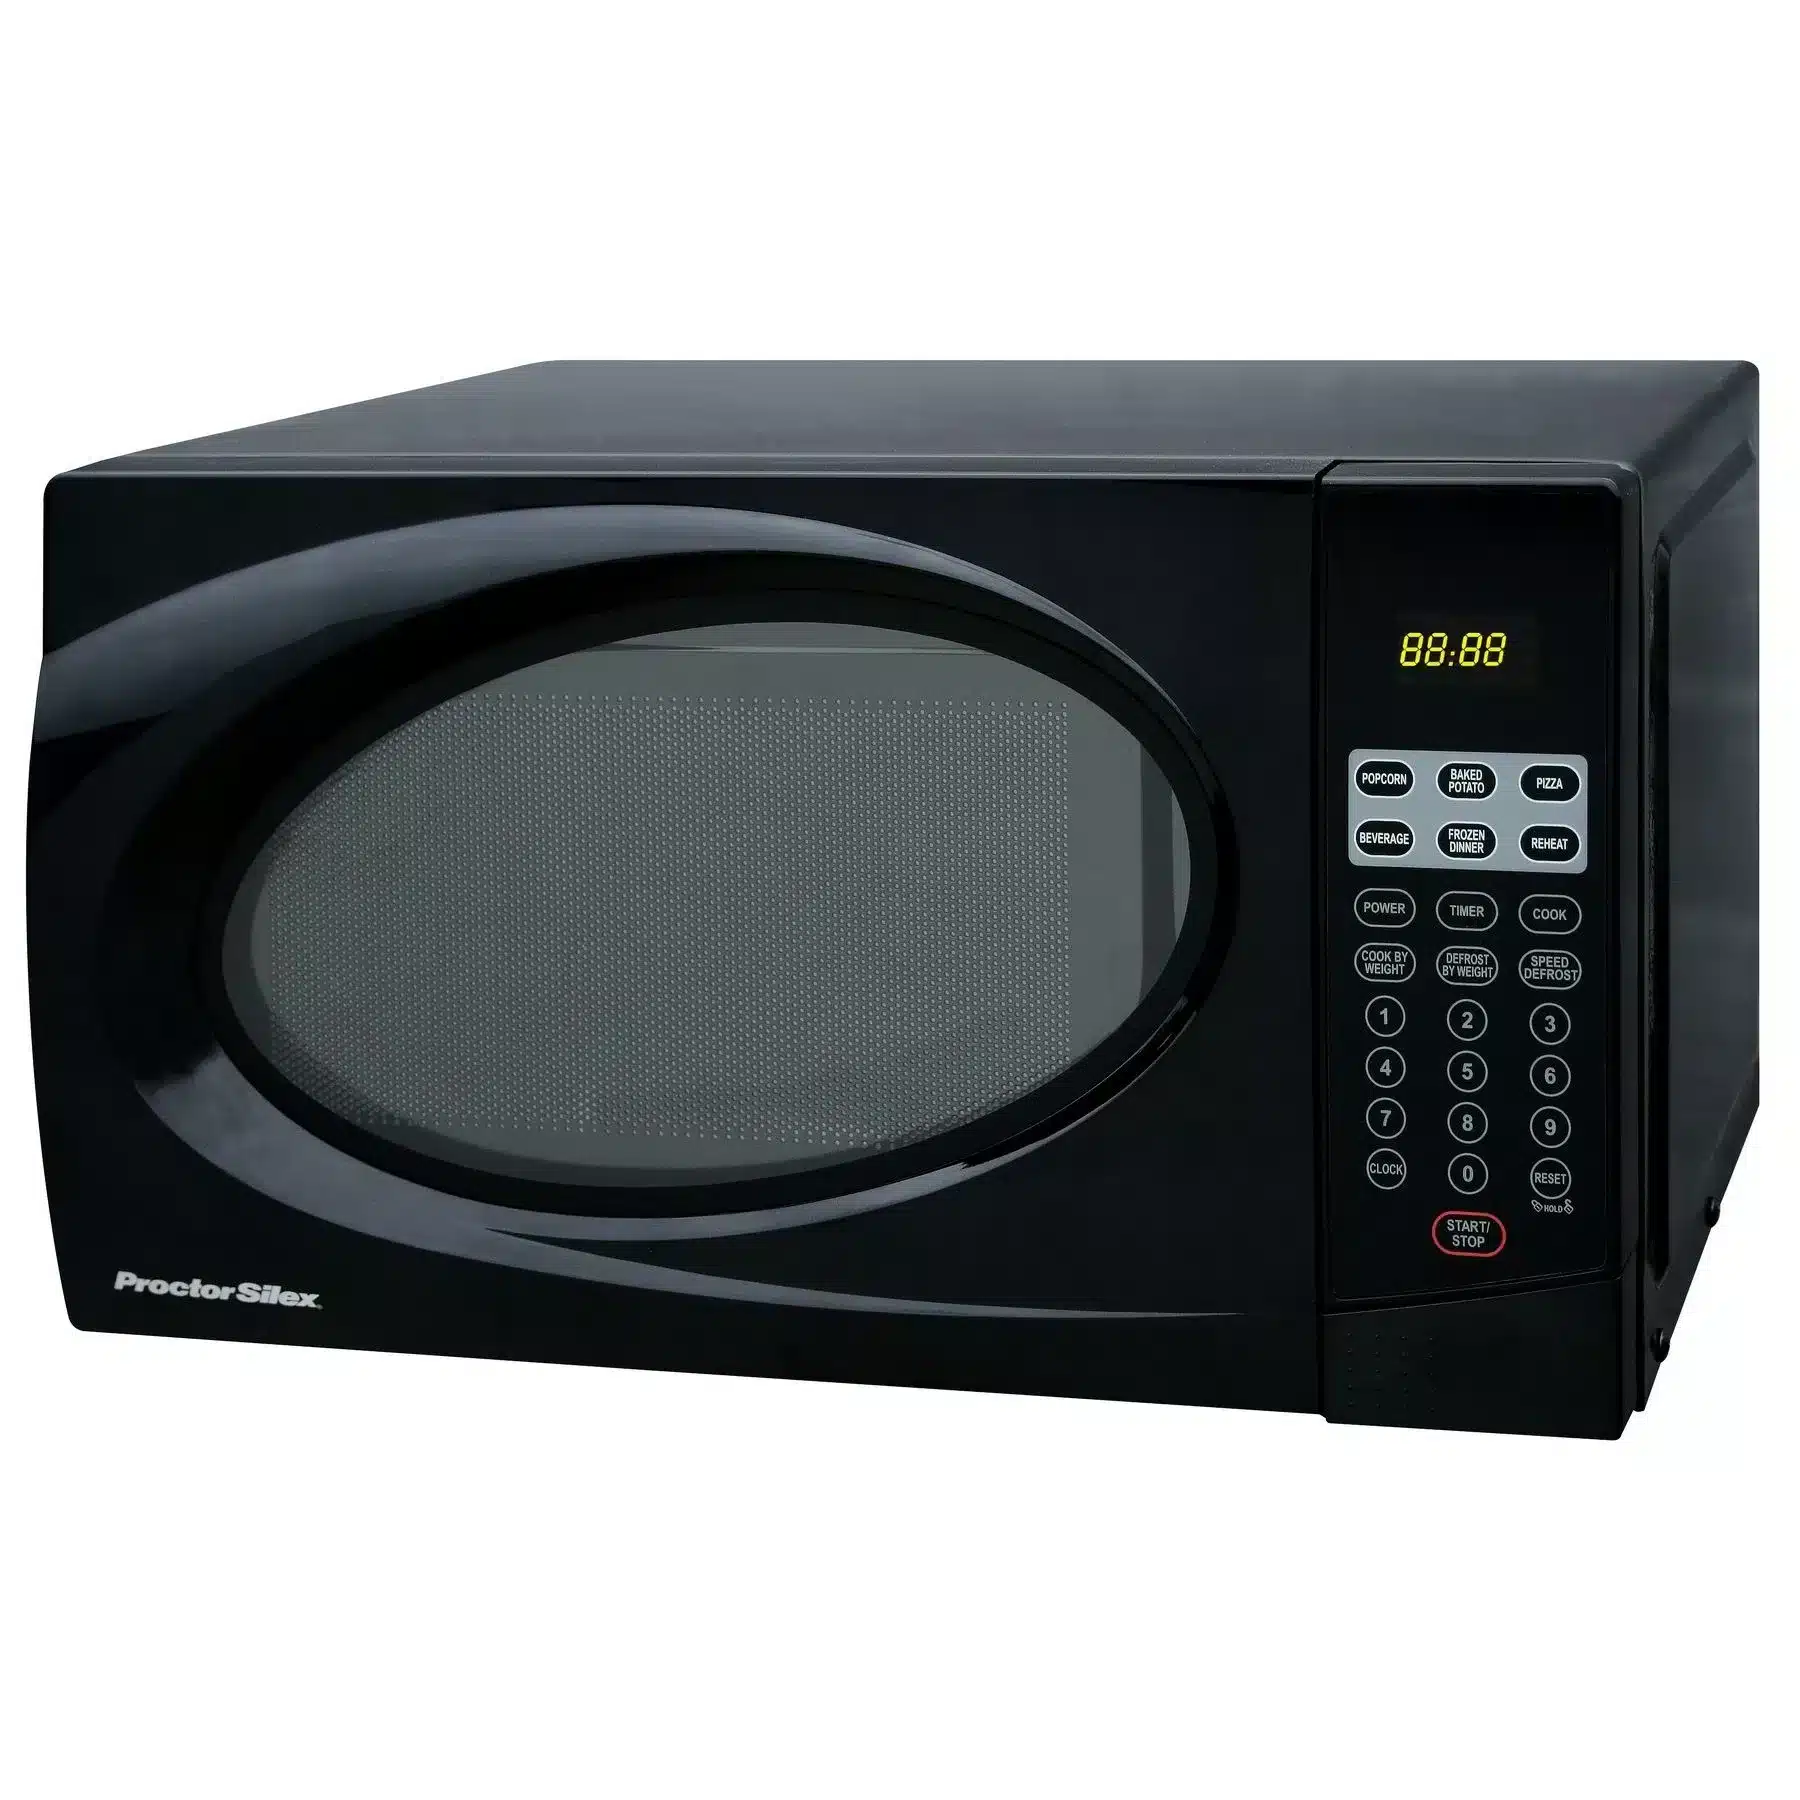 How To Set The Clock On A Proctor Silex Microwave